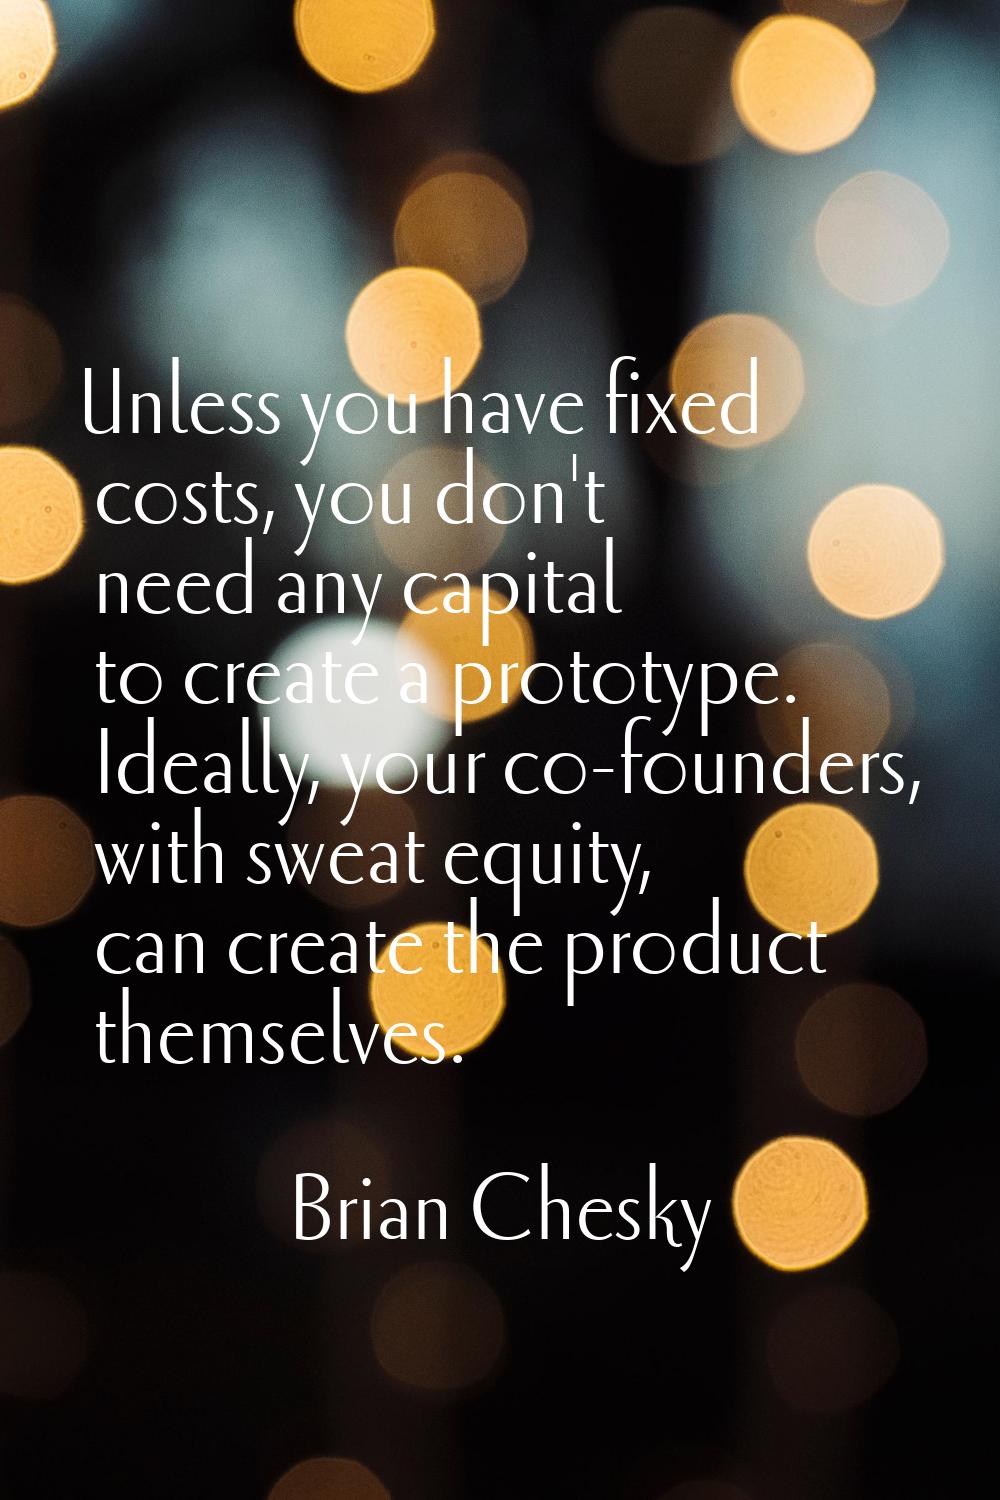 Unless you have fixed costs, you don't need any capital to create a prototype. Ideally, your co-fou